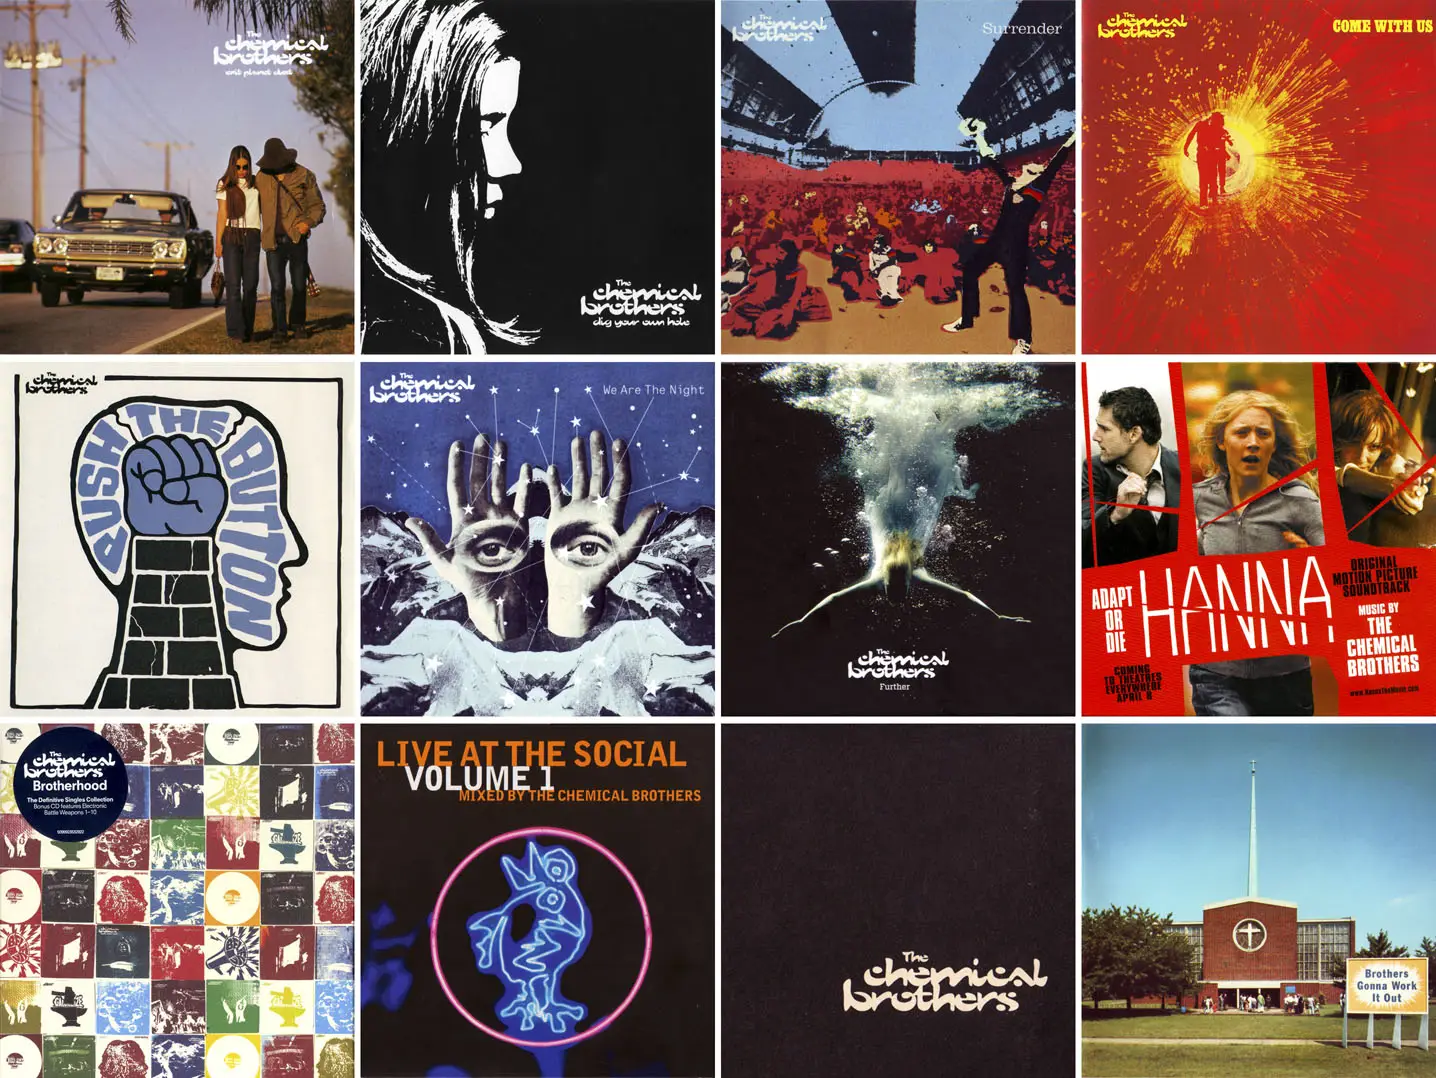 Compilations collection. Chemical brothers albums. Chemical brothers альбомы. Кемикал бразерс. The Chemical brothers CD.